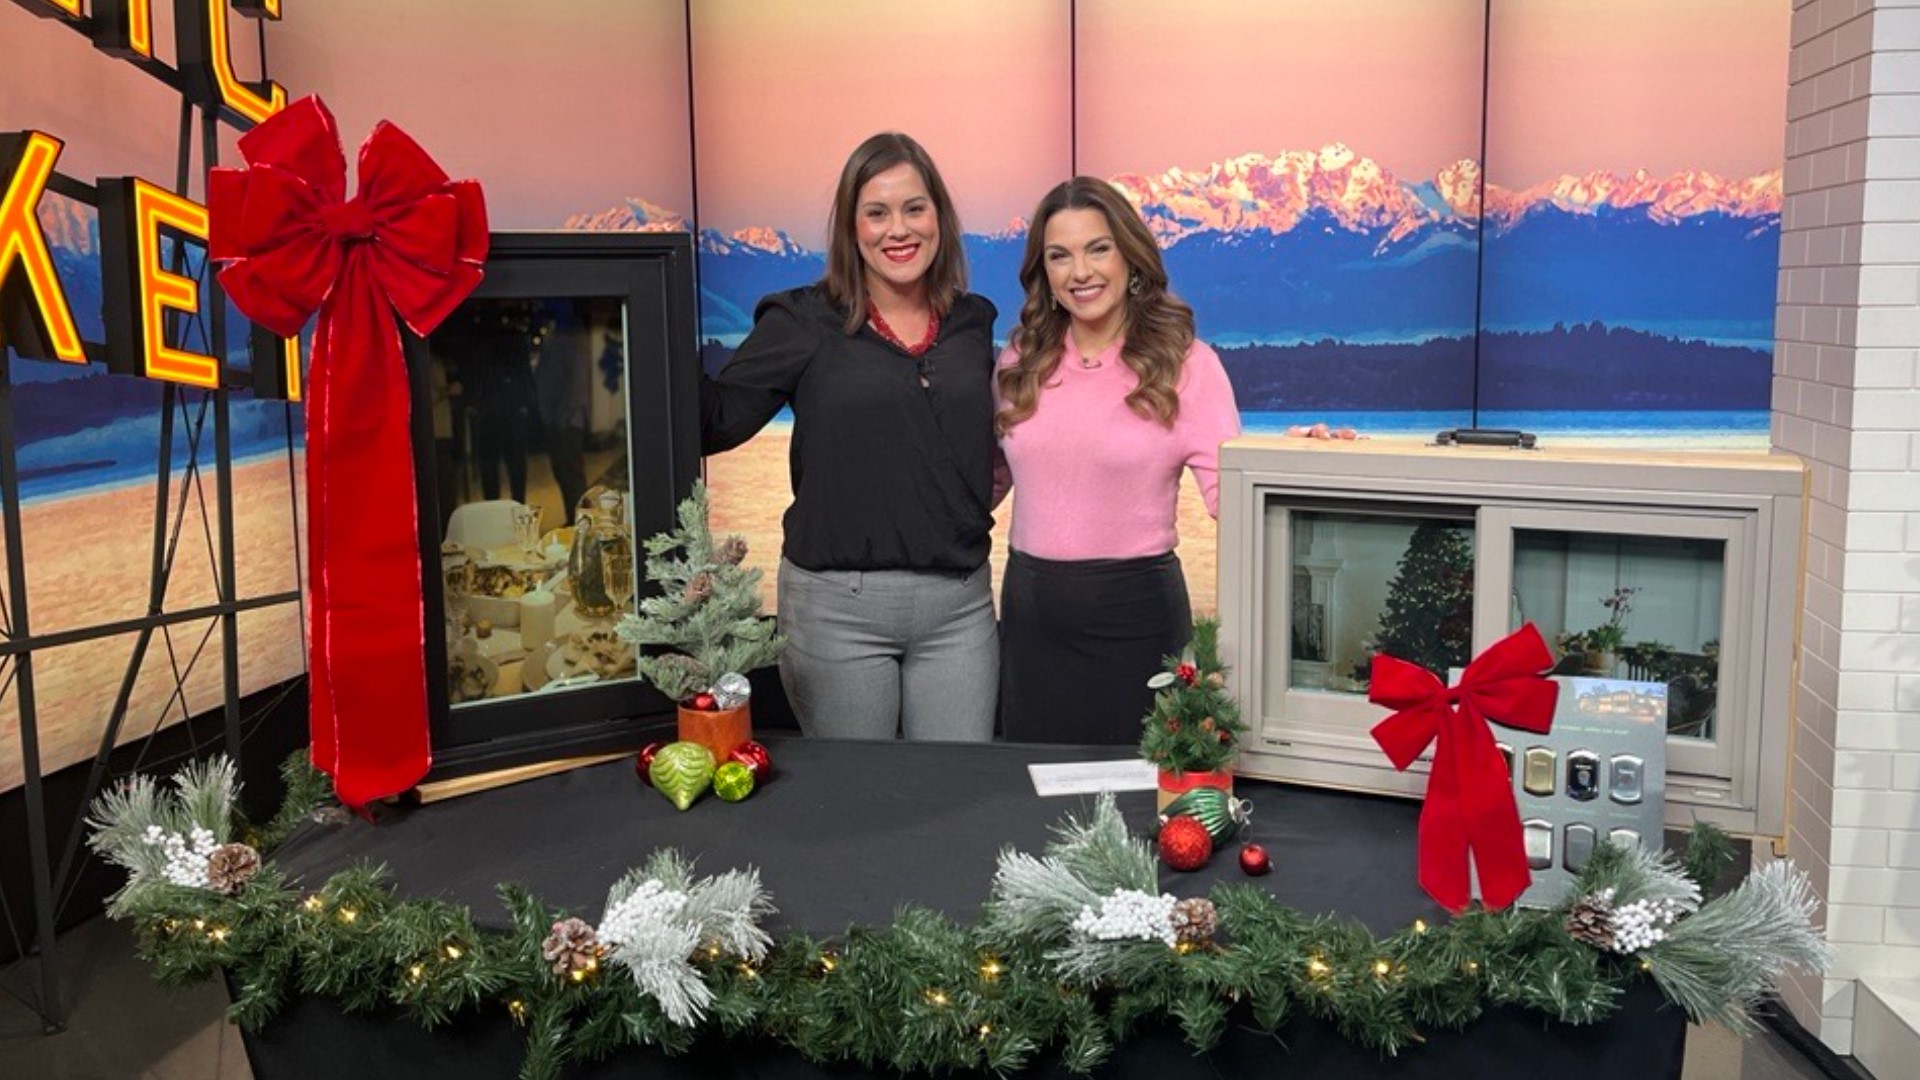 Alyssa Jung of Renewal by Andersen talks to Amity about why the end of the year is a great time to get started on a window project. Sponsored by Renewal by Andersen.